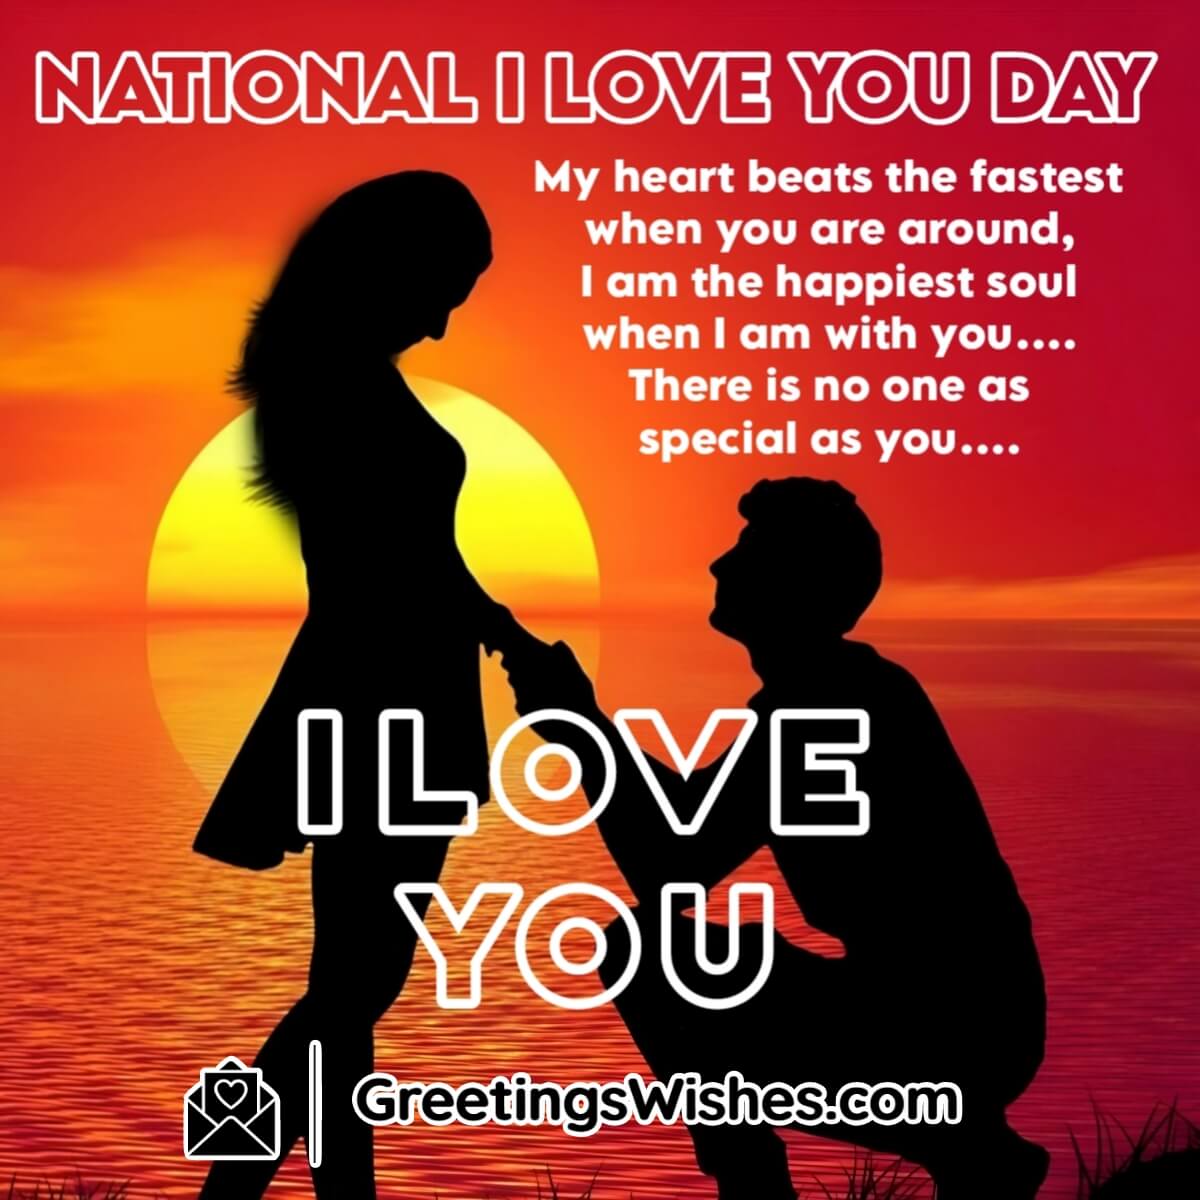 National I Love You Day Message For Her